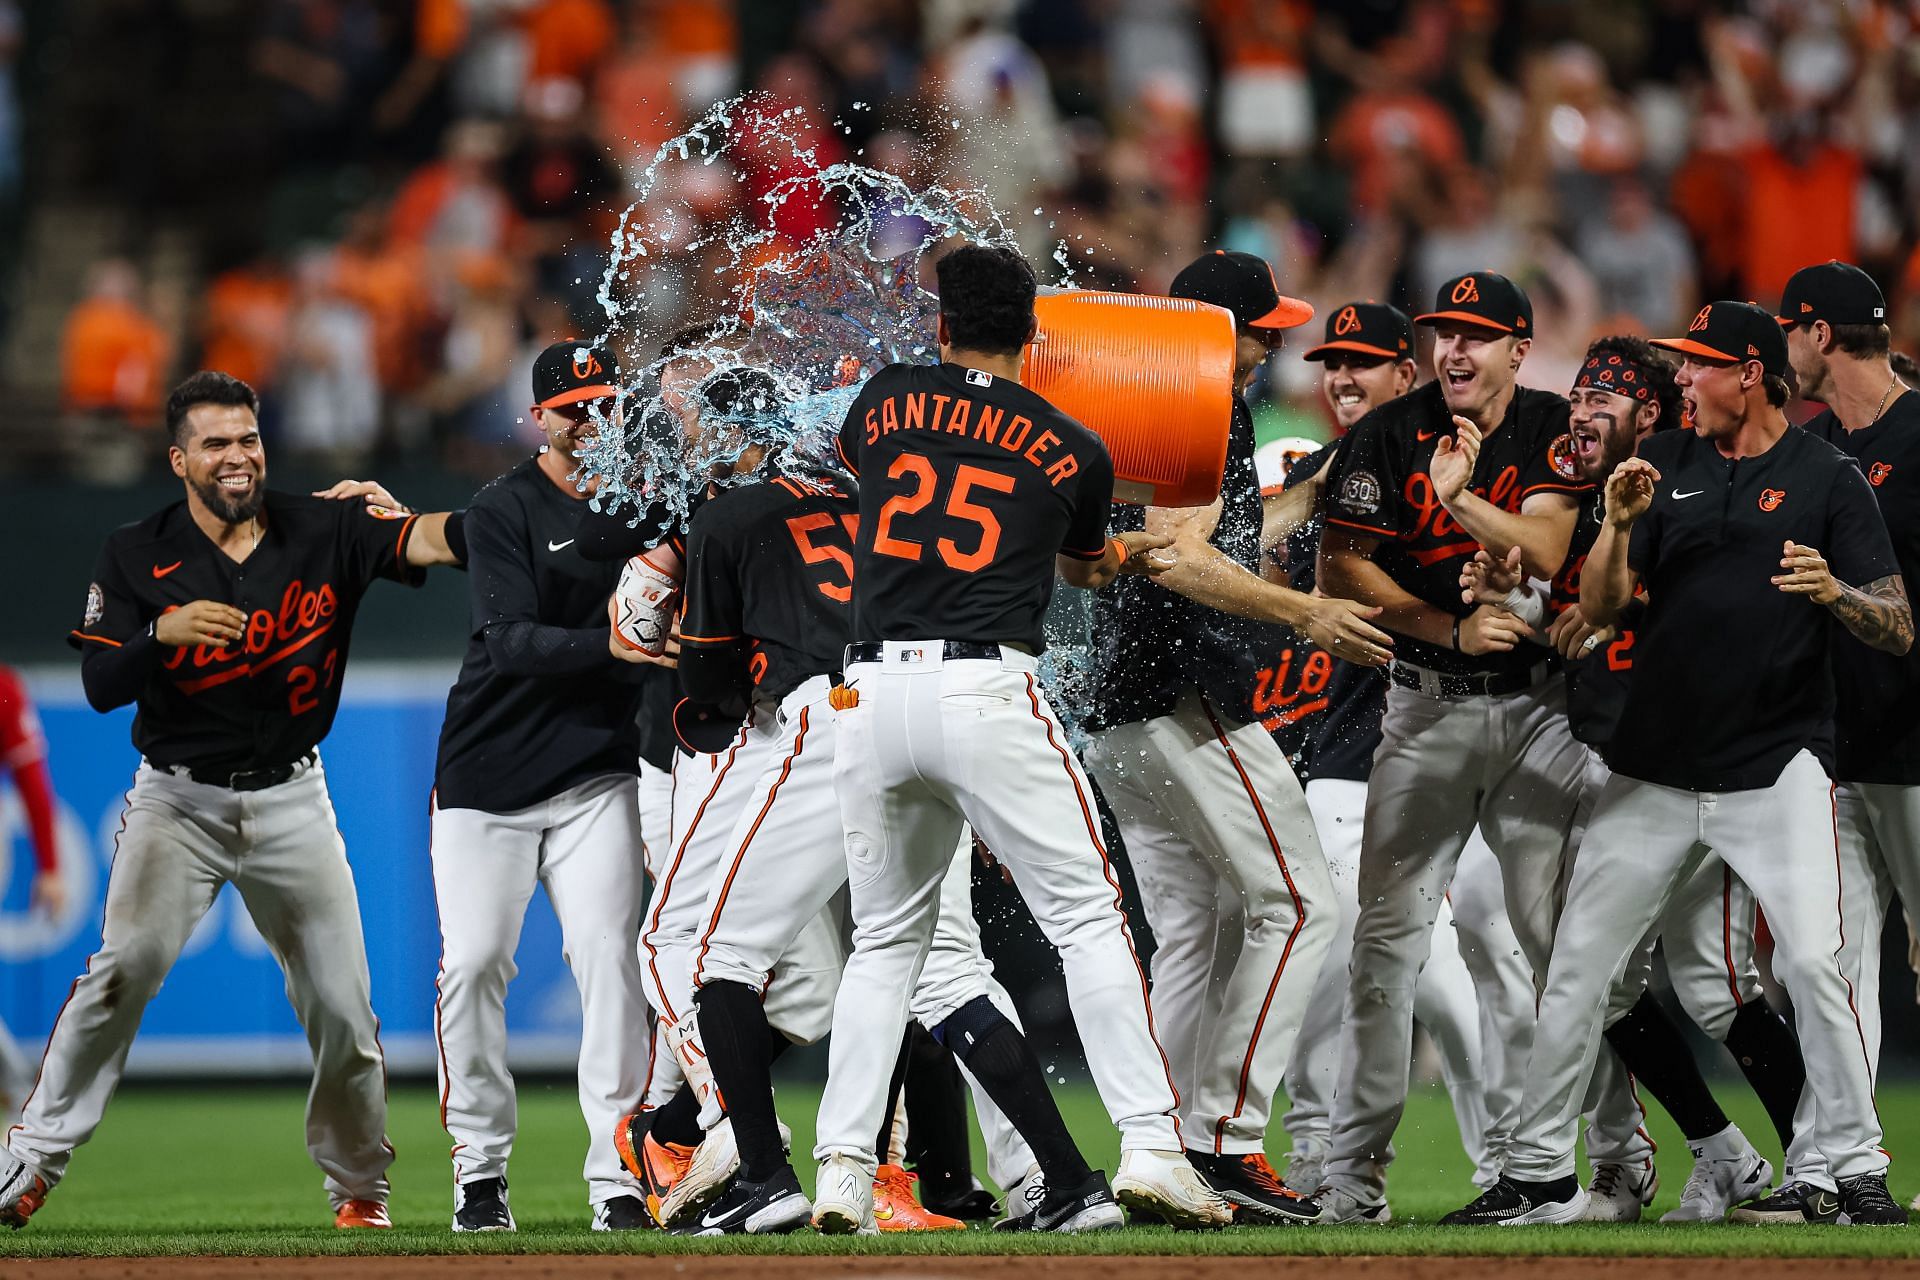 Baltimore Orioles: Five Different Ways to Build on the Winning Streak